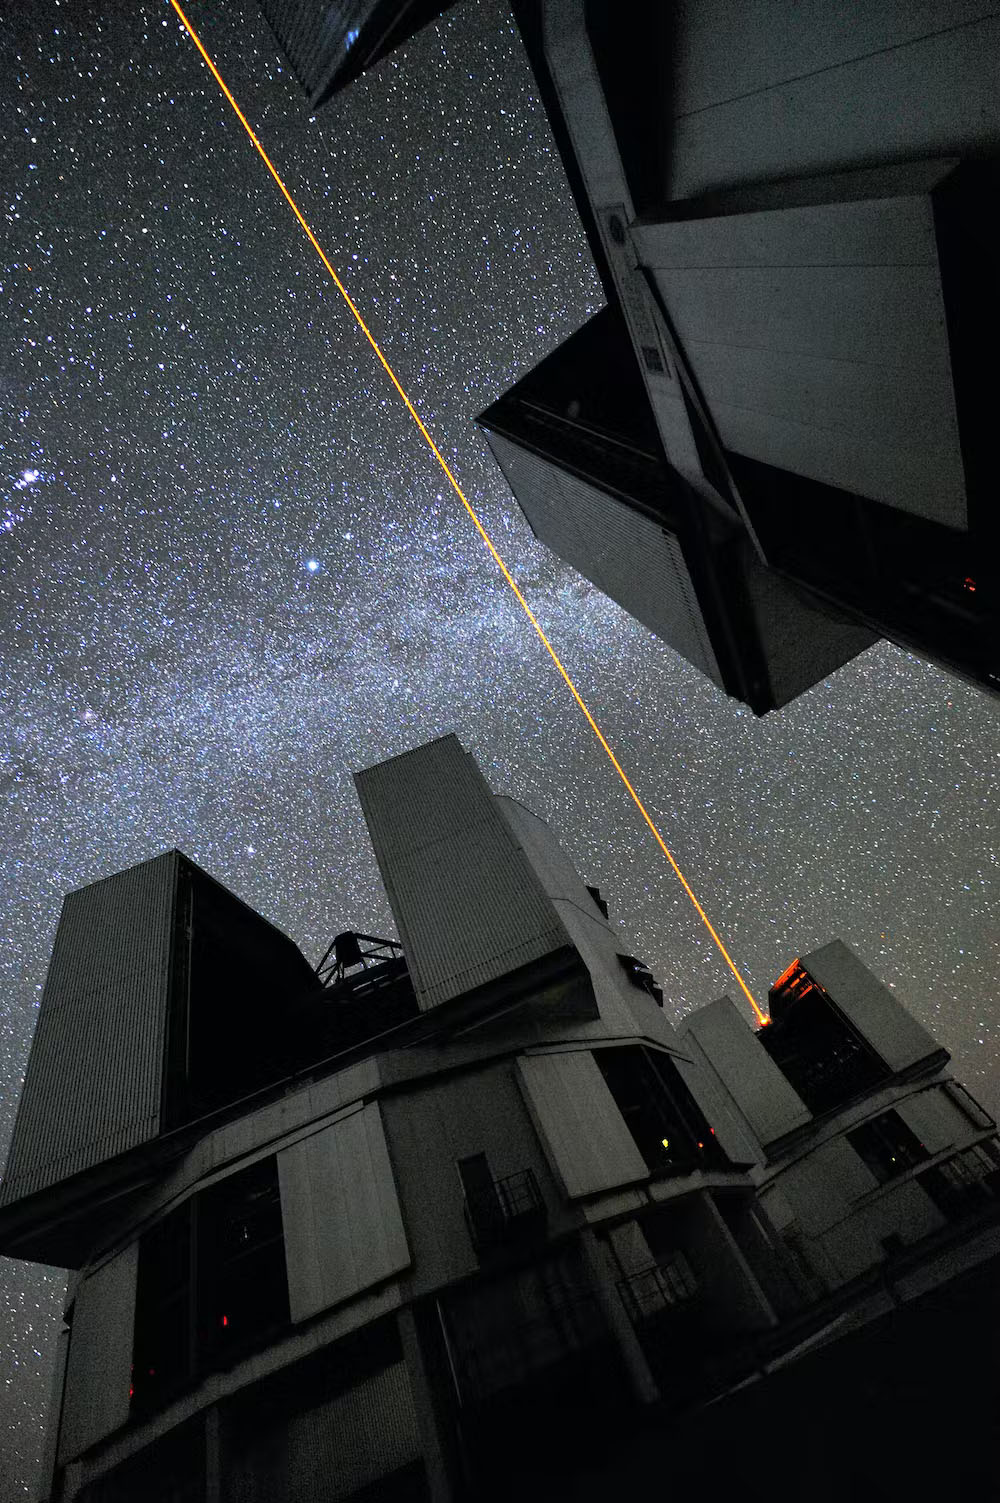 A laser shooting up from an observatory into a starry sky